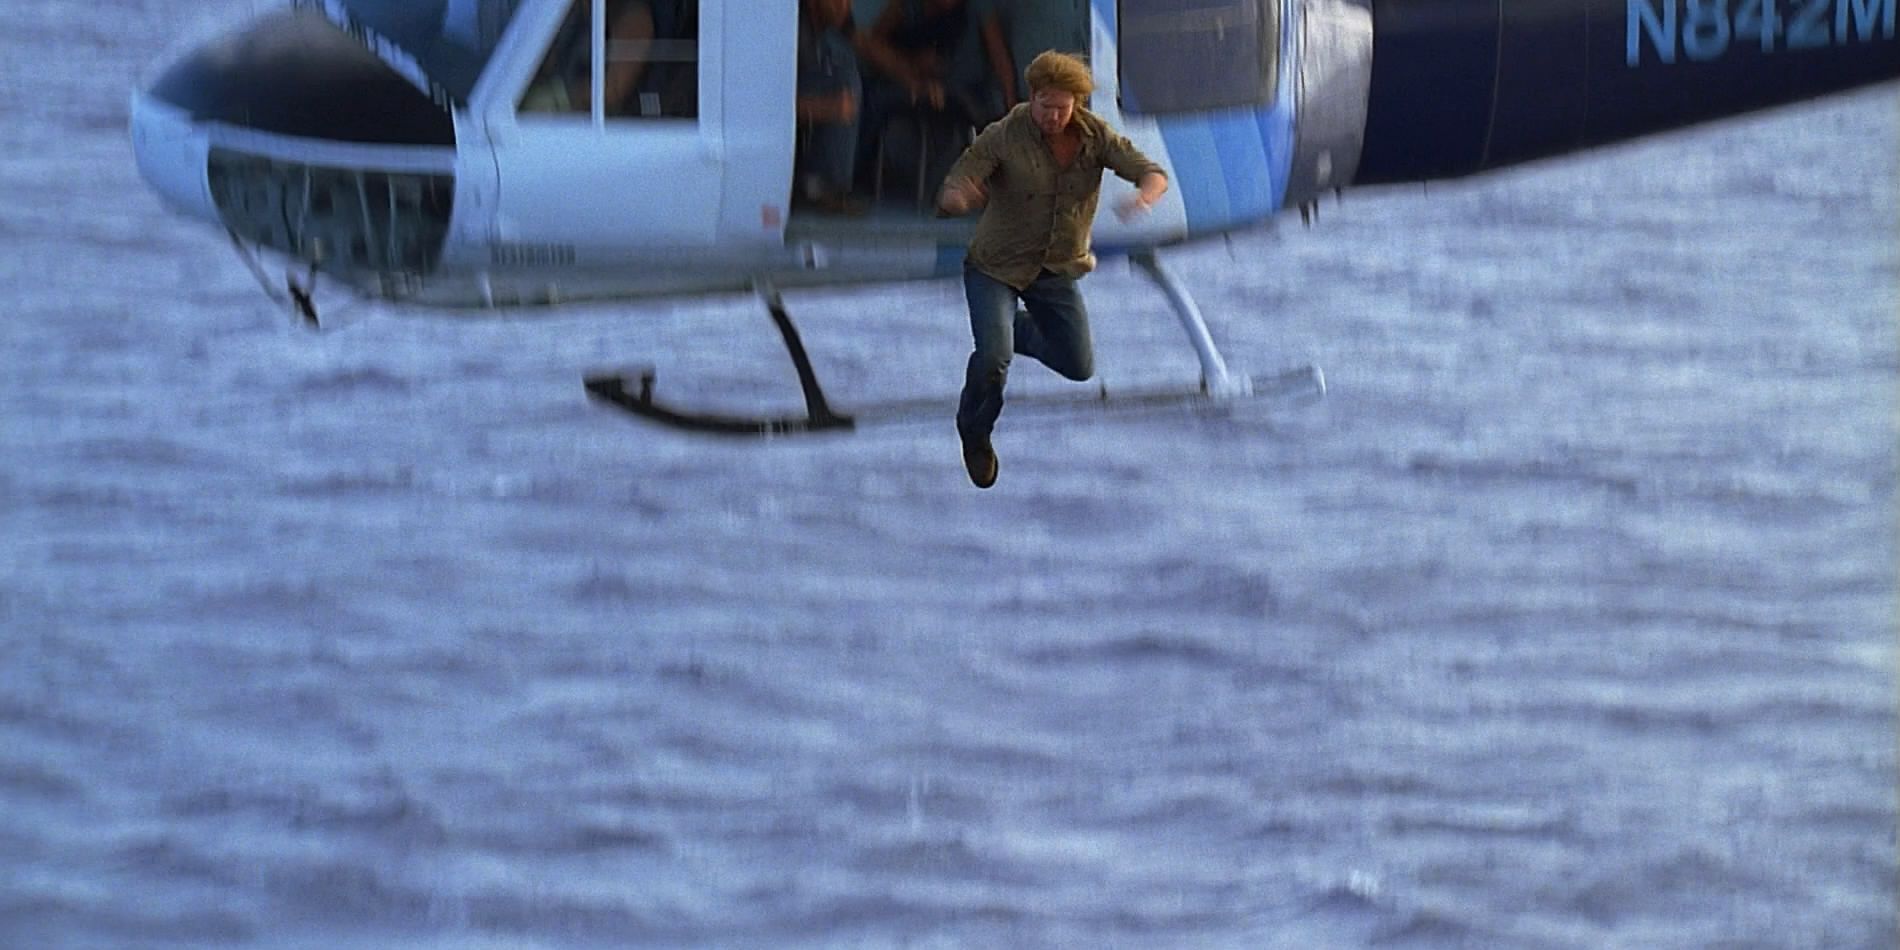 Josh Holloway as Sawyer Helicopter Jump in Lost